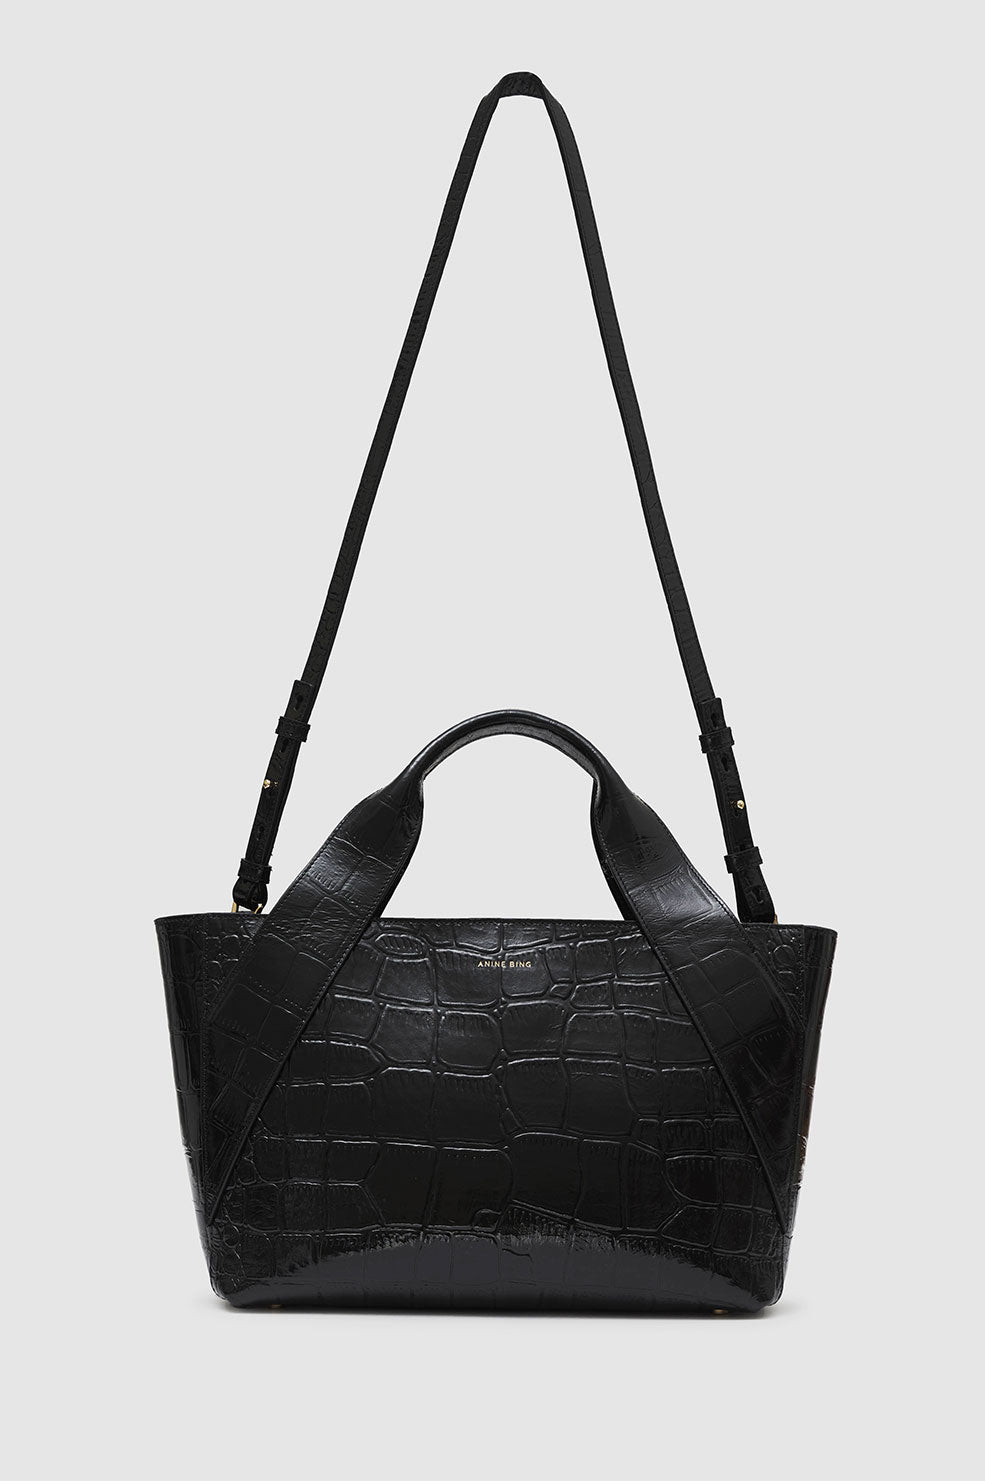 ANINE BING Maya Tote - Black Oversized Embossed - Full View with Strap